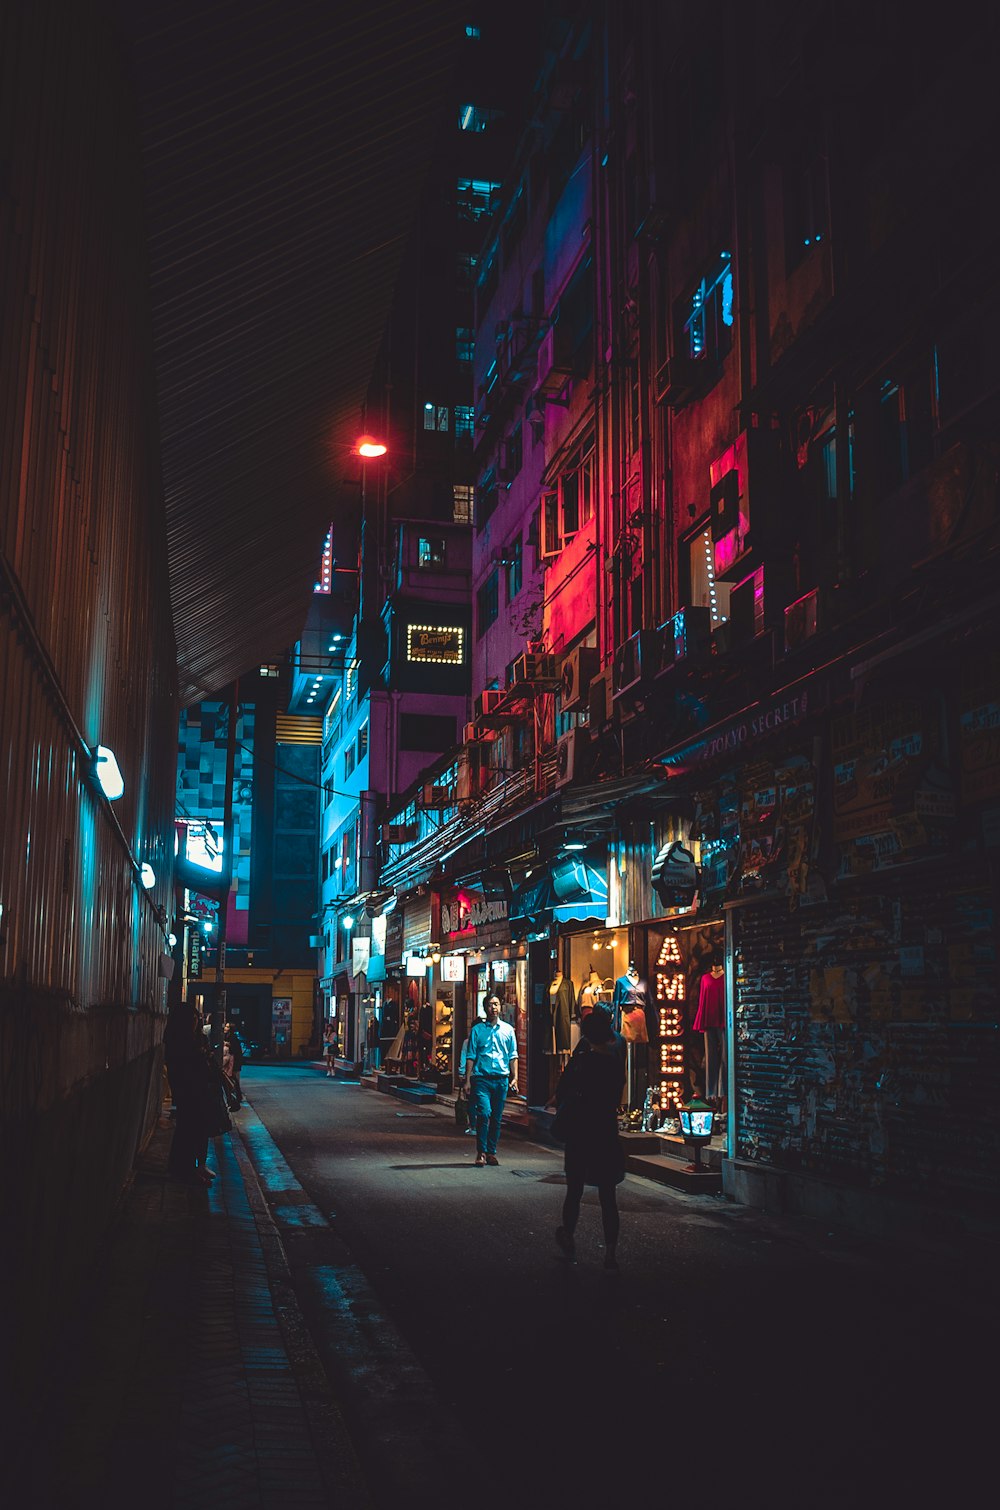 Kowloon Pictures Download Free Images on Unsplash